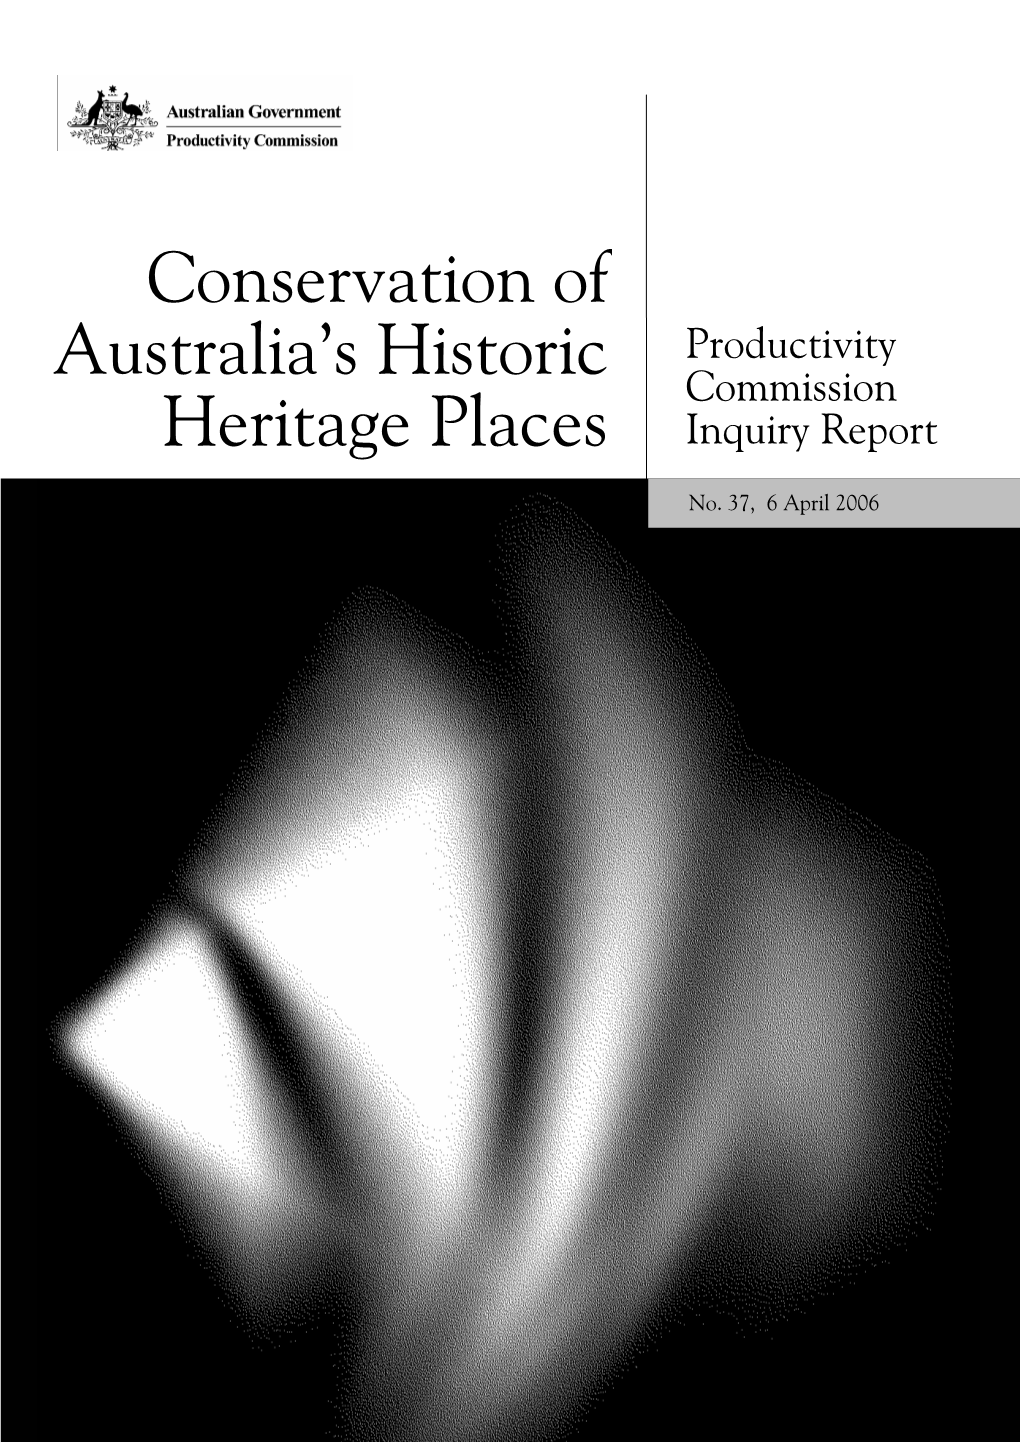 Conservation of Australia's Historic Heritage Places